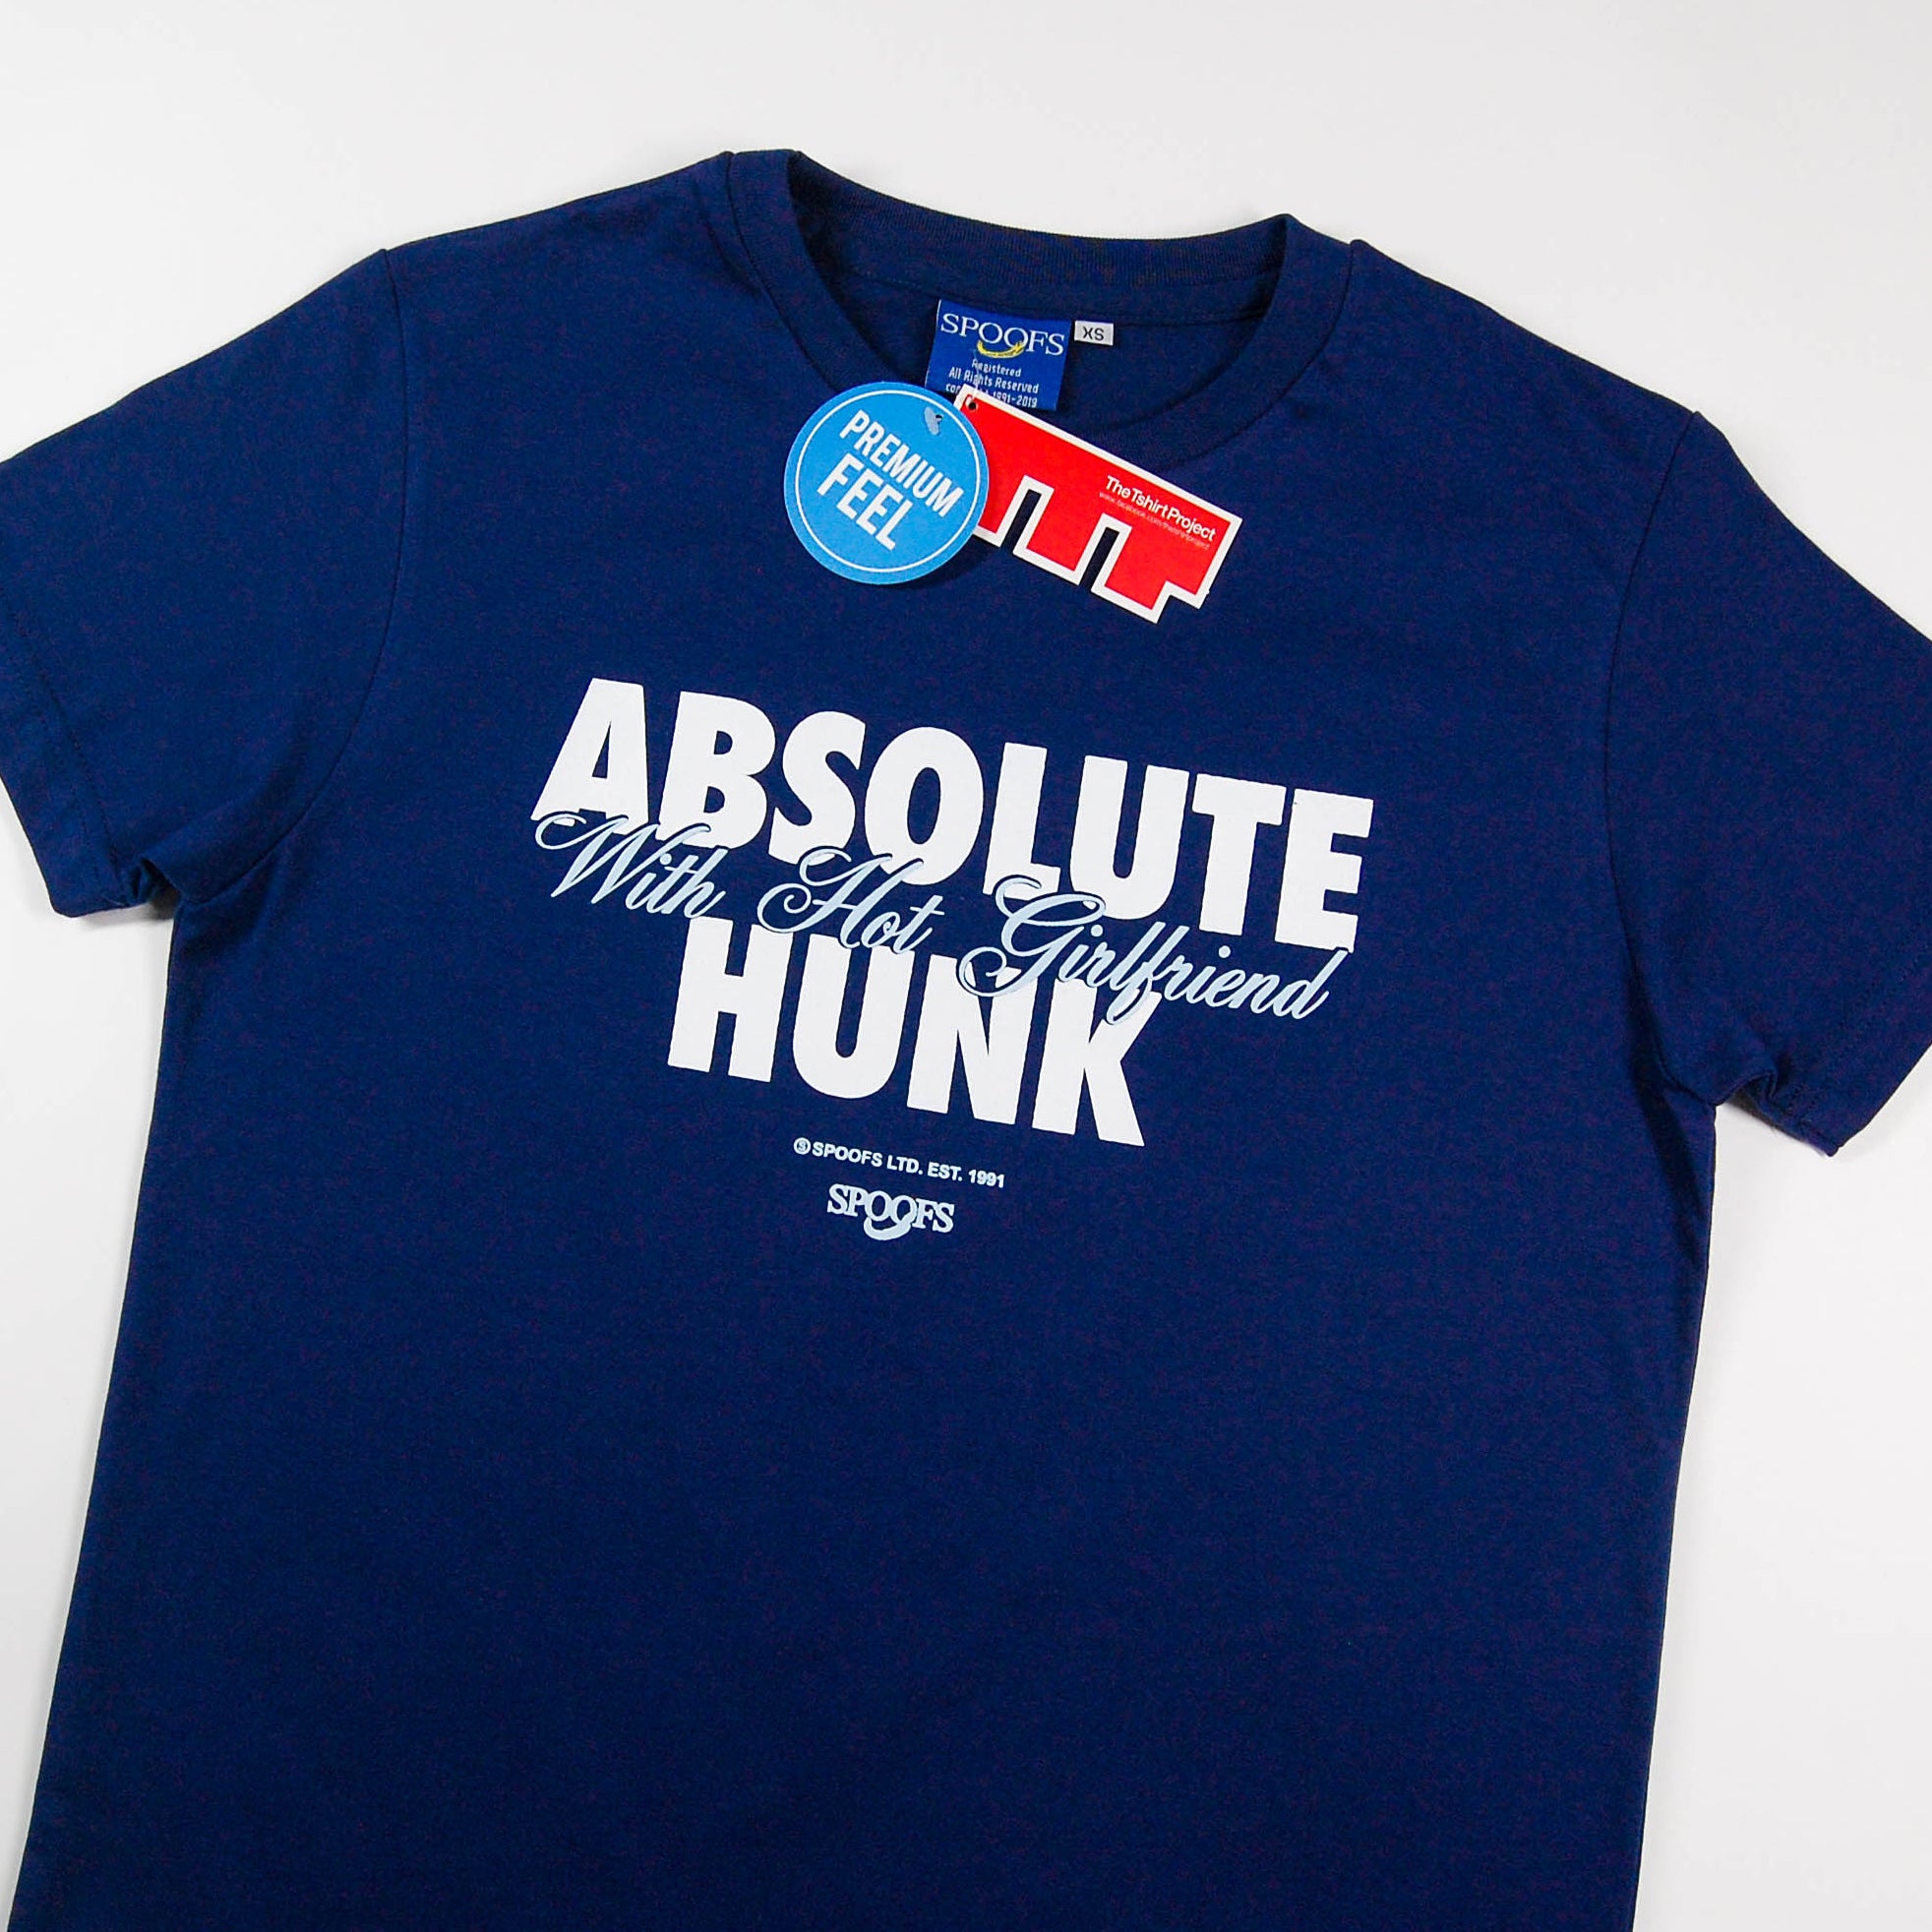 Absolute Hunk (Navy Blue)